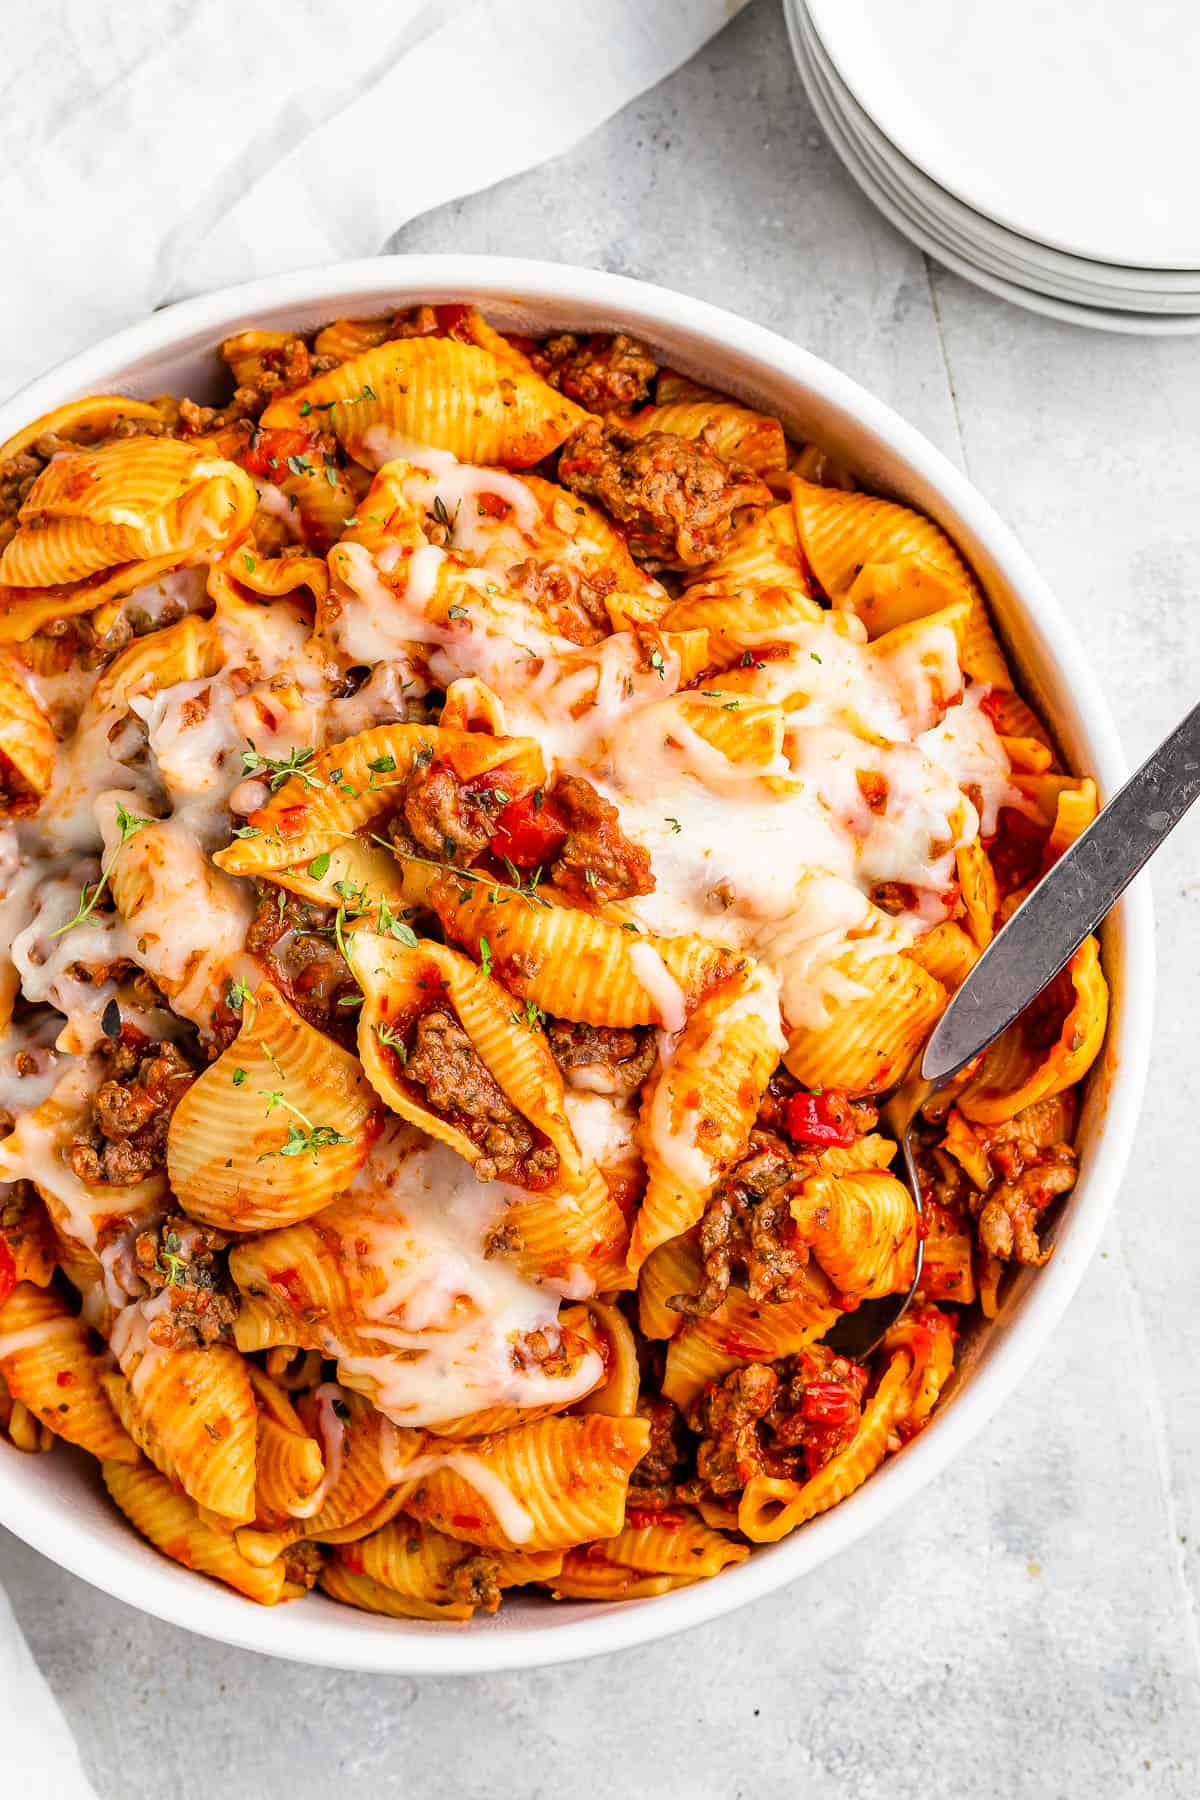 A serving dish filled with cooked pasta shells and ground beef in tomato sauce, topped with melted mozzarella.